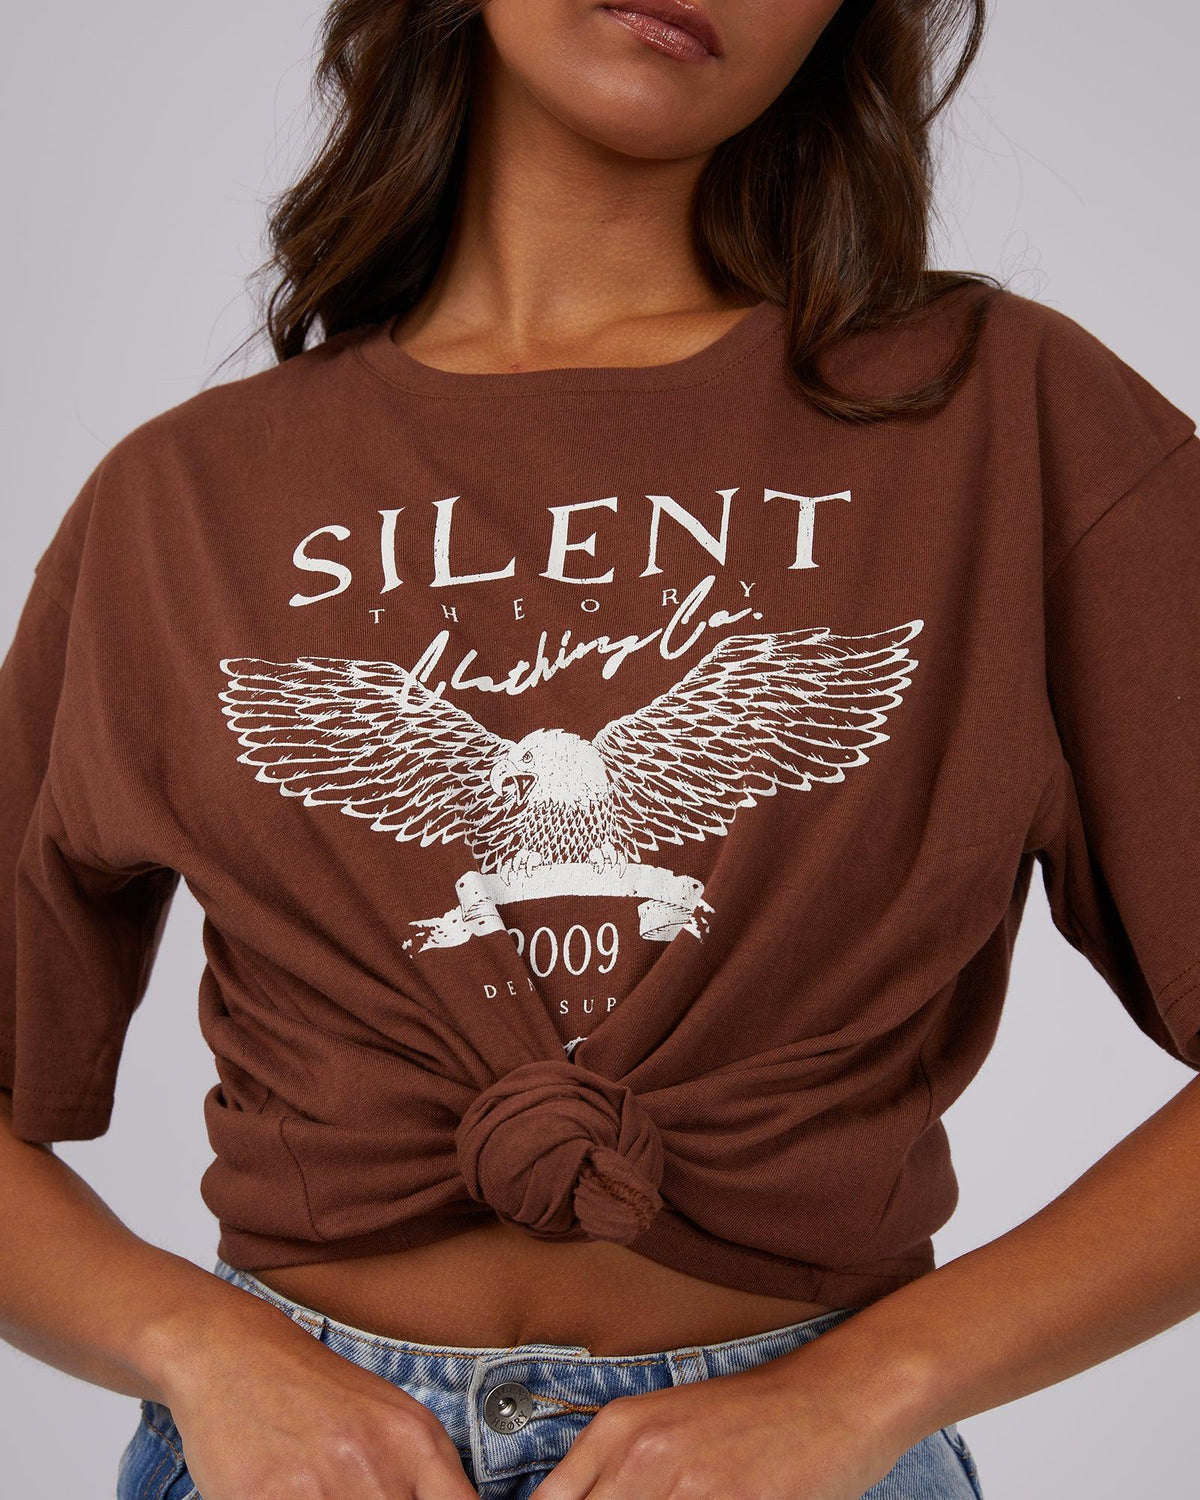 Silent Theory Ladies-Fly High Tee Brown-Edge Clothing